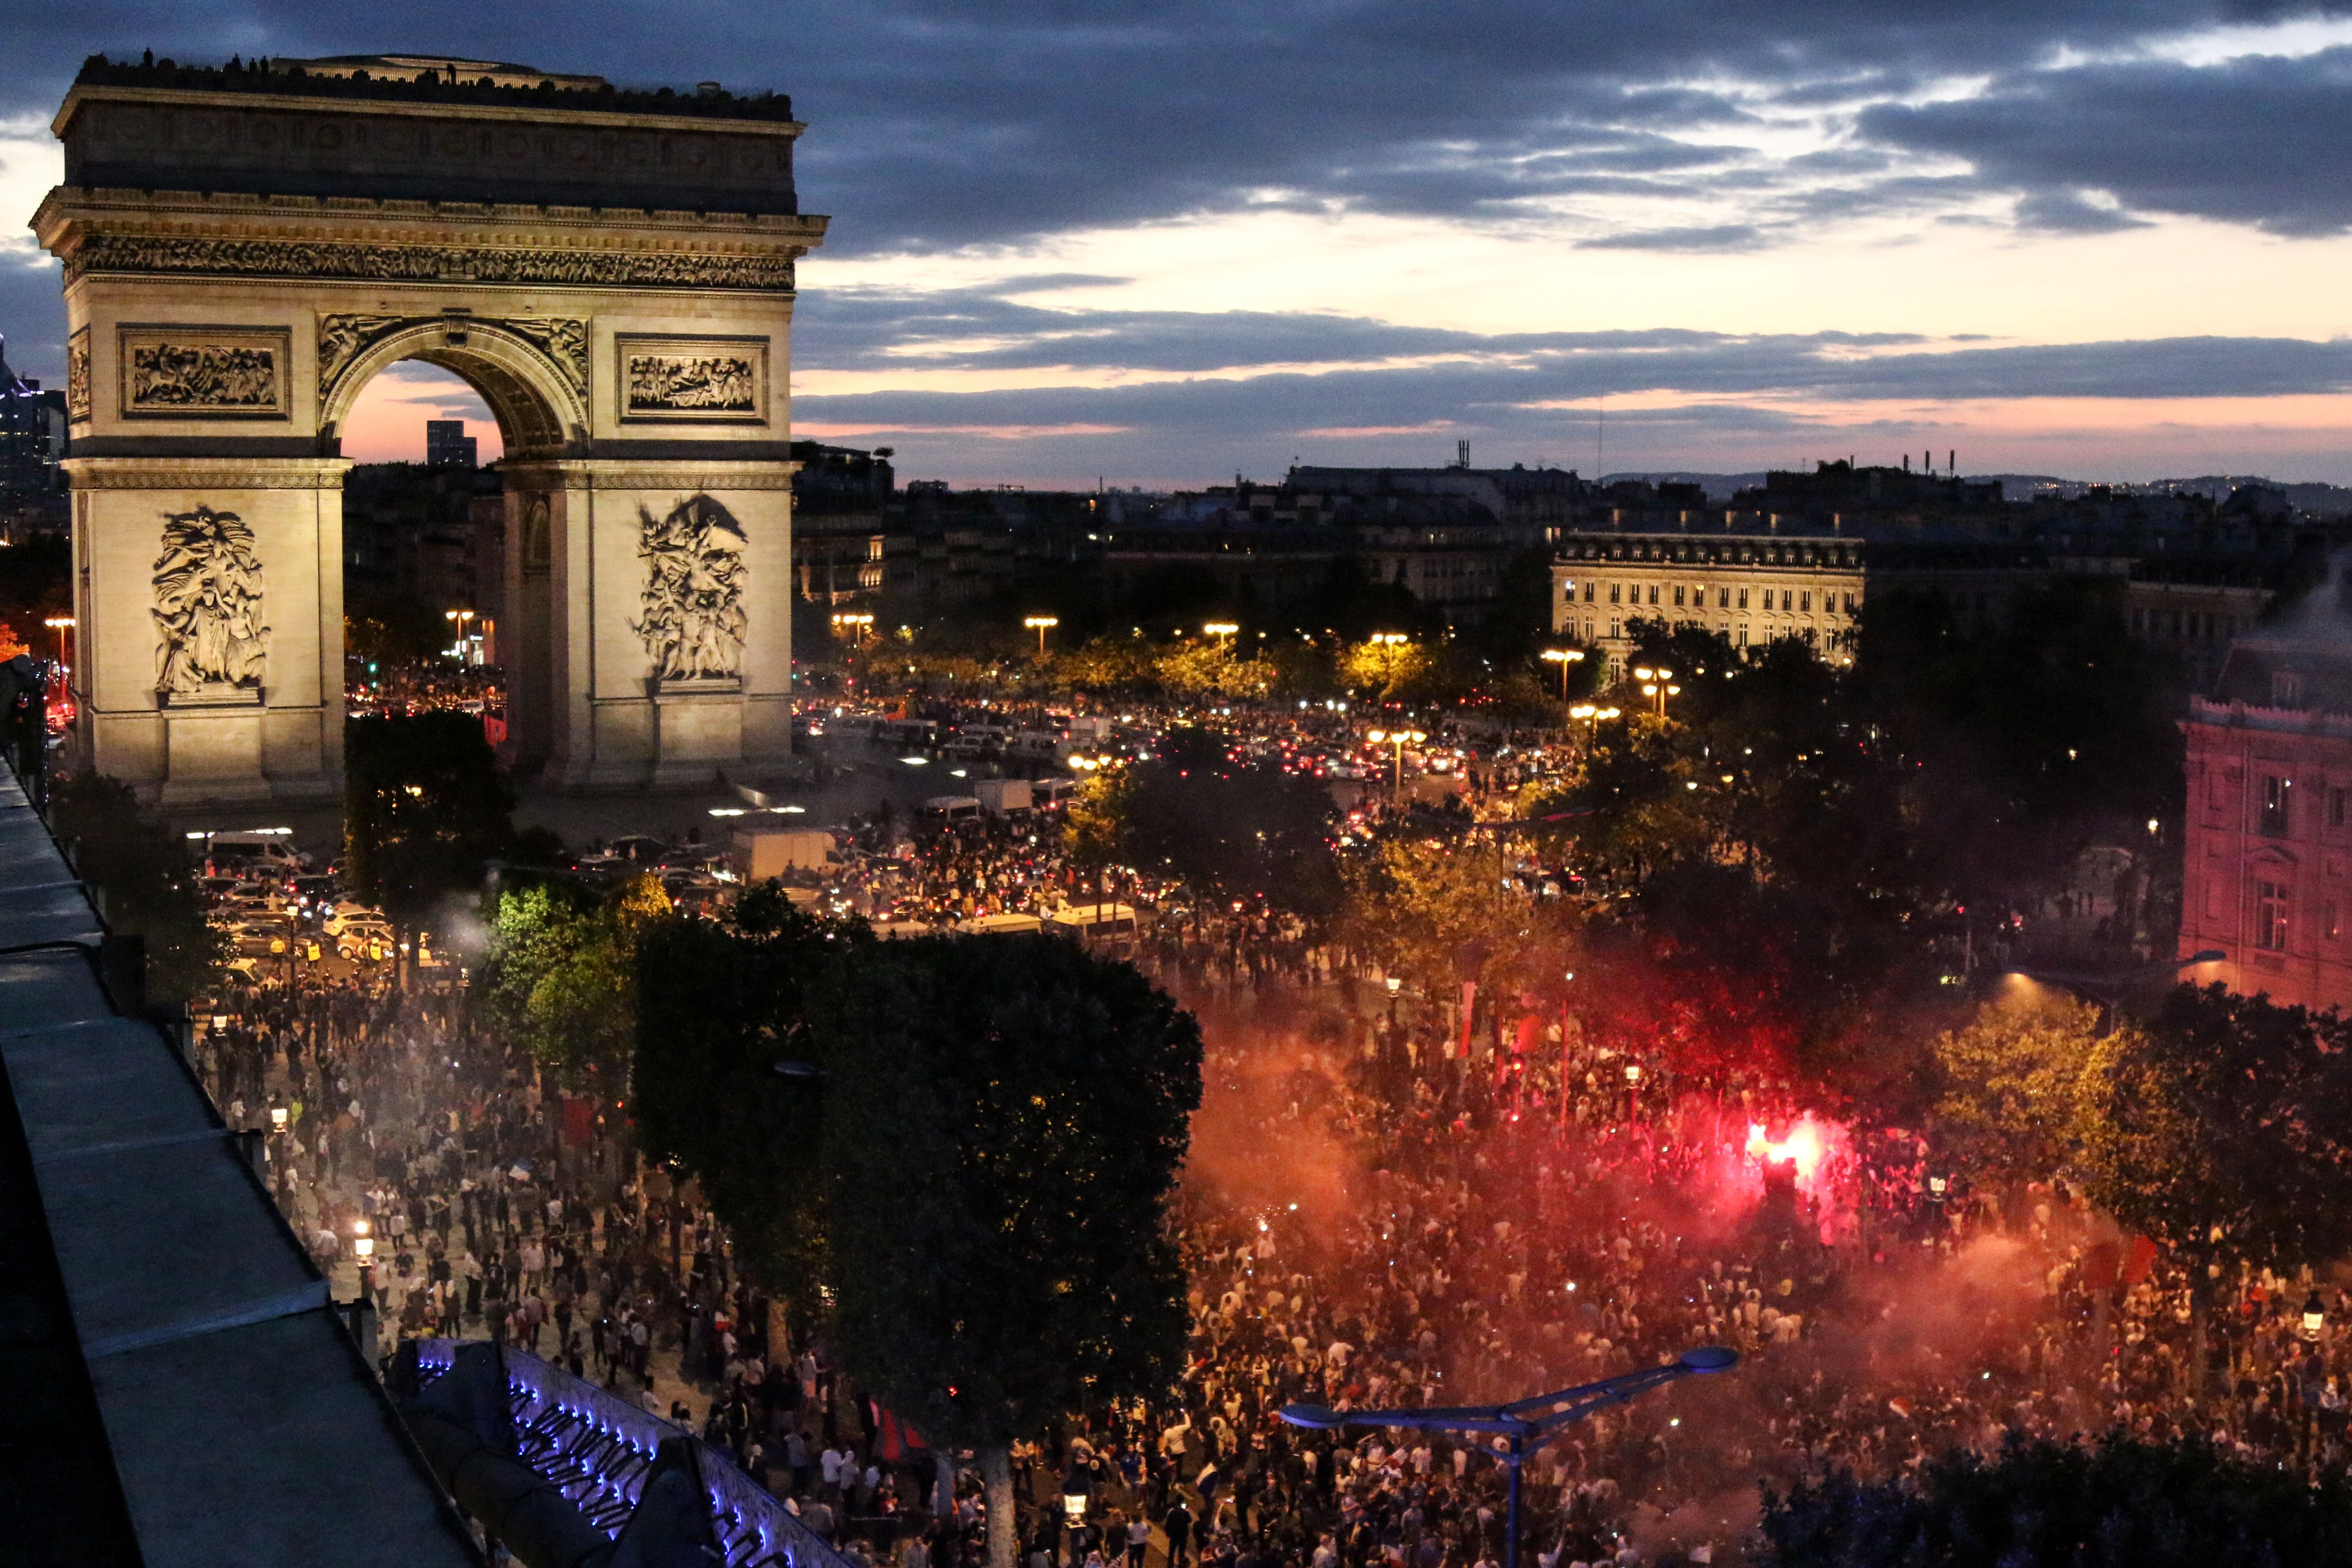 TOPSHOT - People celebrate France's victory at The Arc de Triomphe on the Champs Elysee in Paris on July 10, 2018, after the final whistle of the Russia 2018 World Cup semi-final football match between France and Belgium. (Photo by ZAKARIA ABDELKAFI / AFP) (Photo credit should read ZAKARIA ABDELKAFI/AFP/Getty Images)